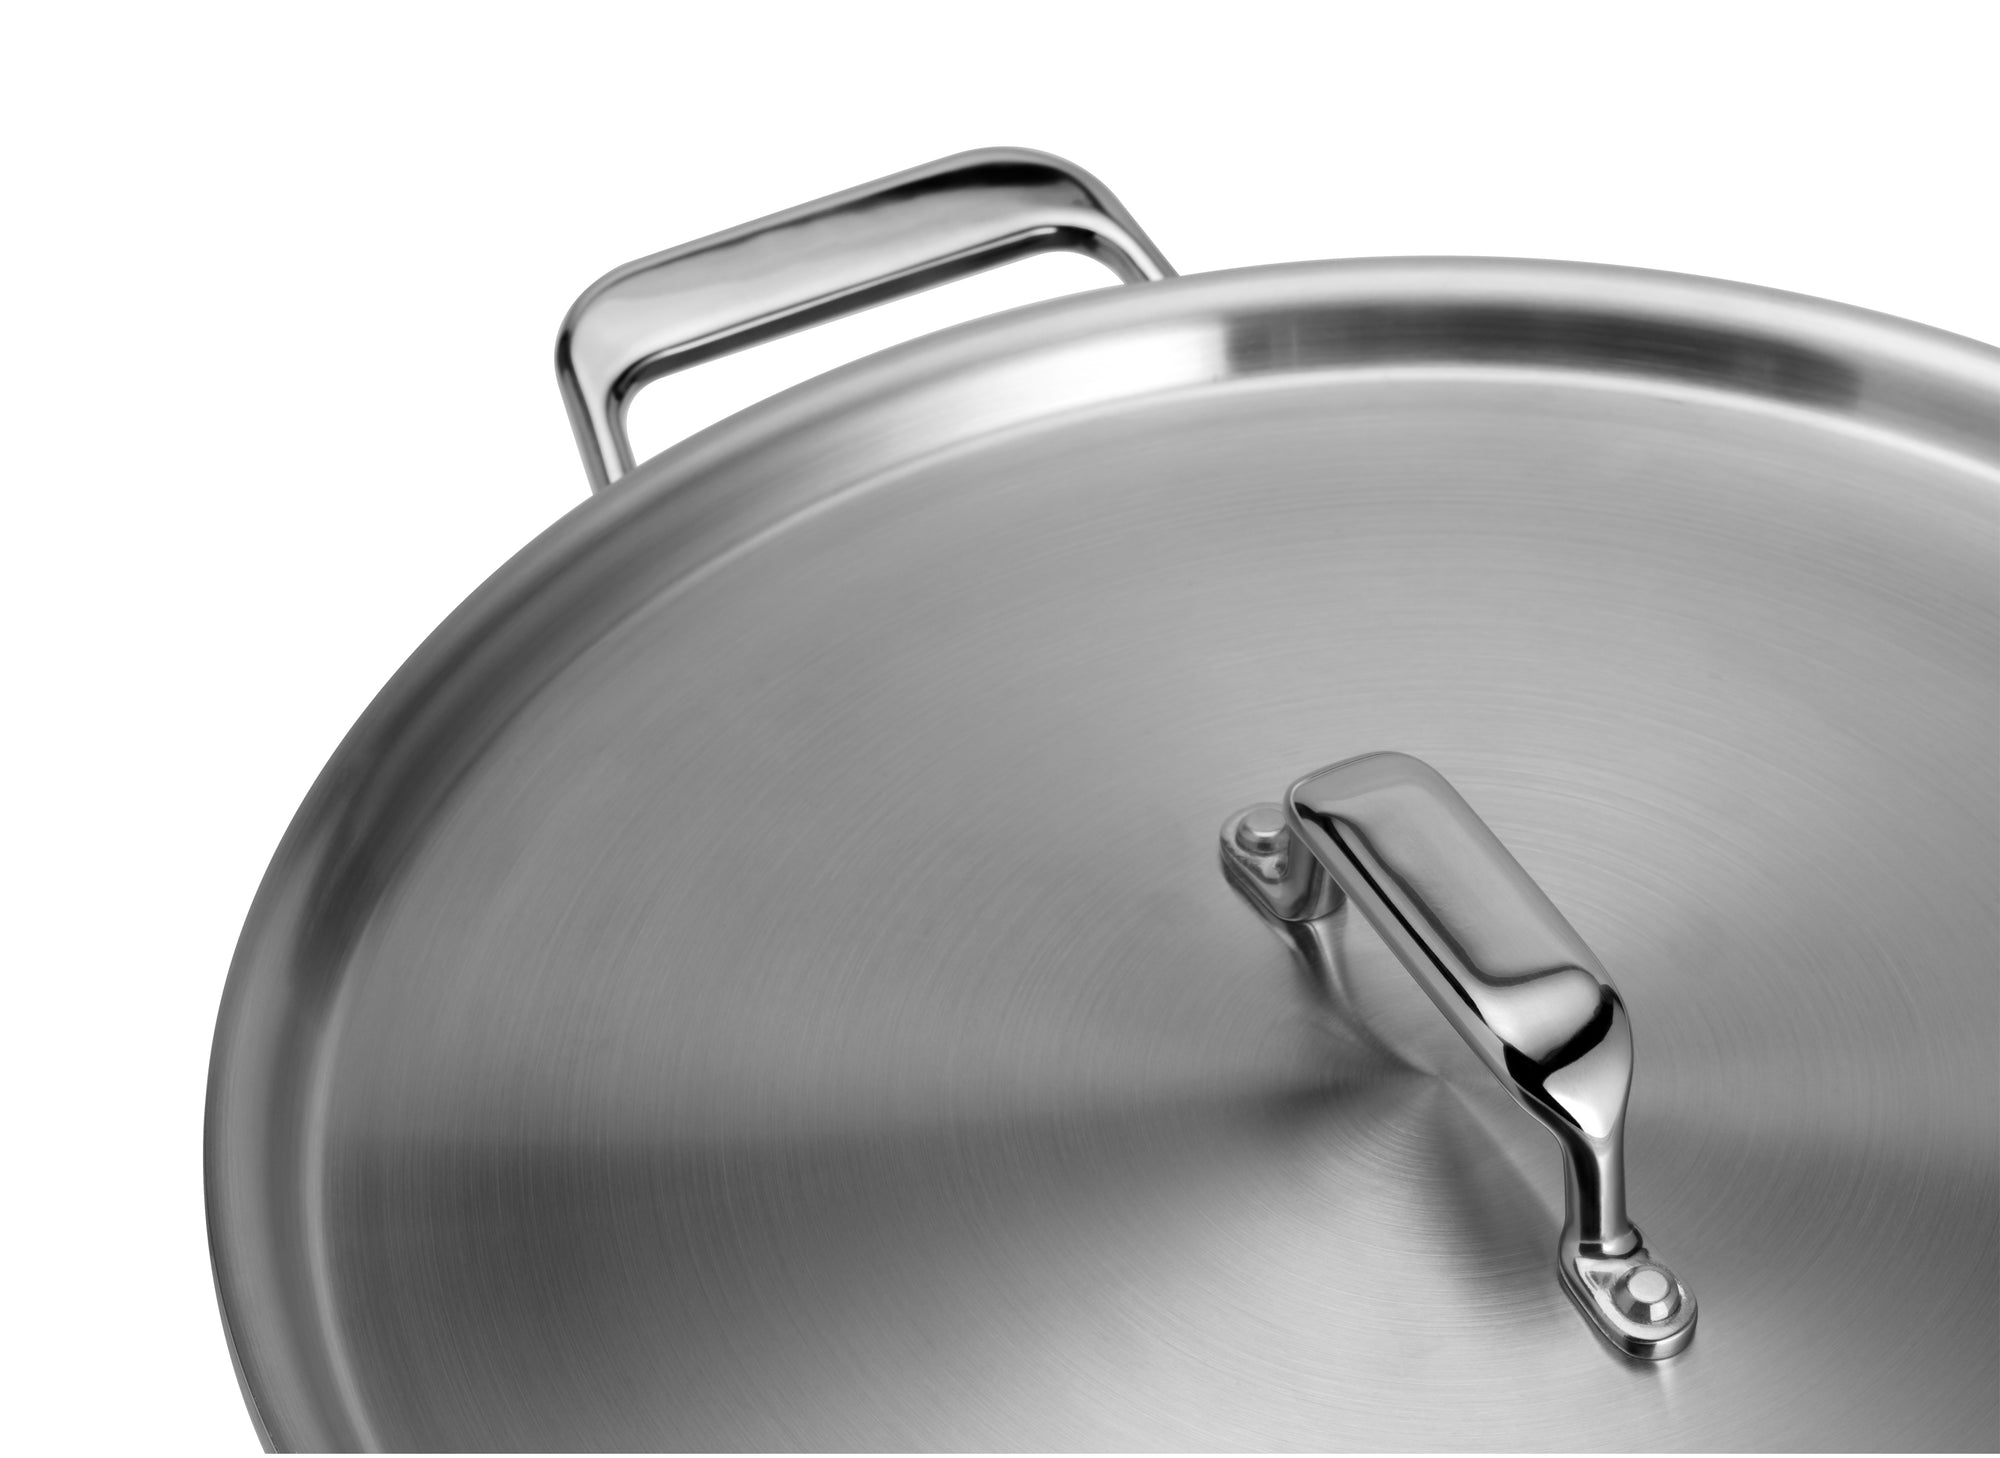  Misen 3 QT Stainless Steel Saucier Pan with Lid - 5